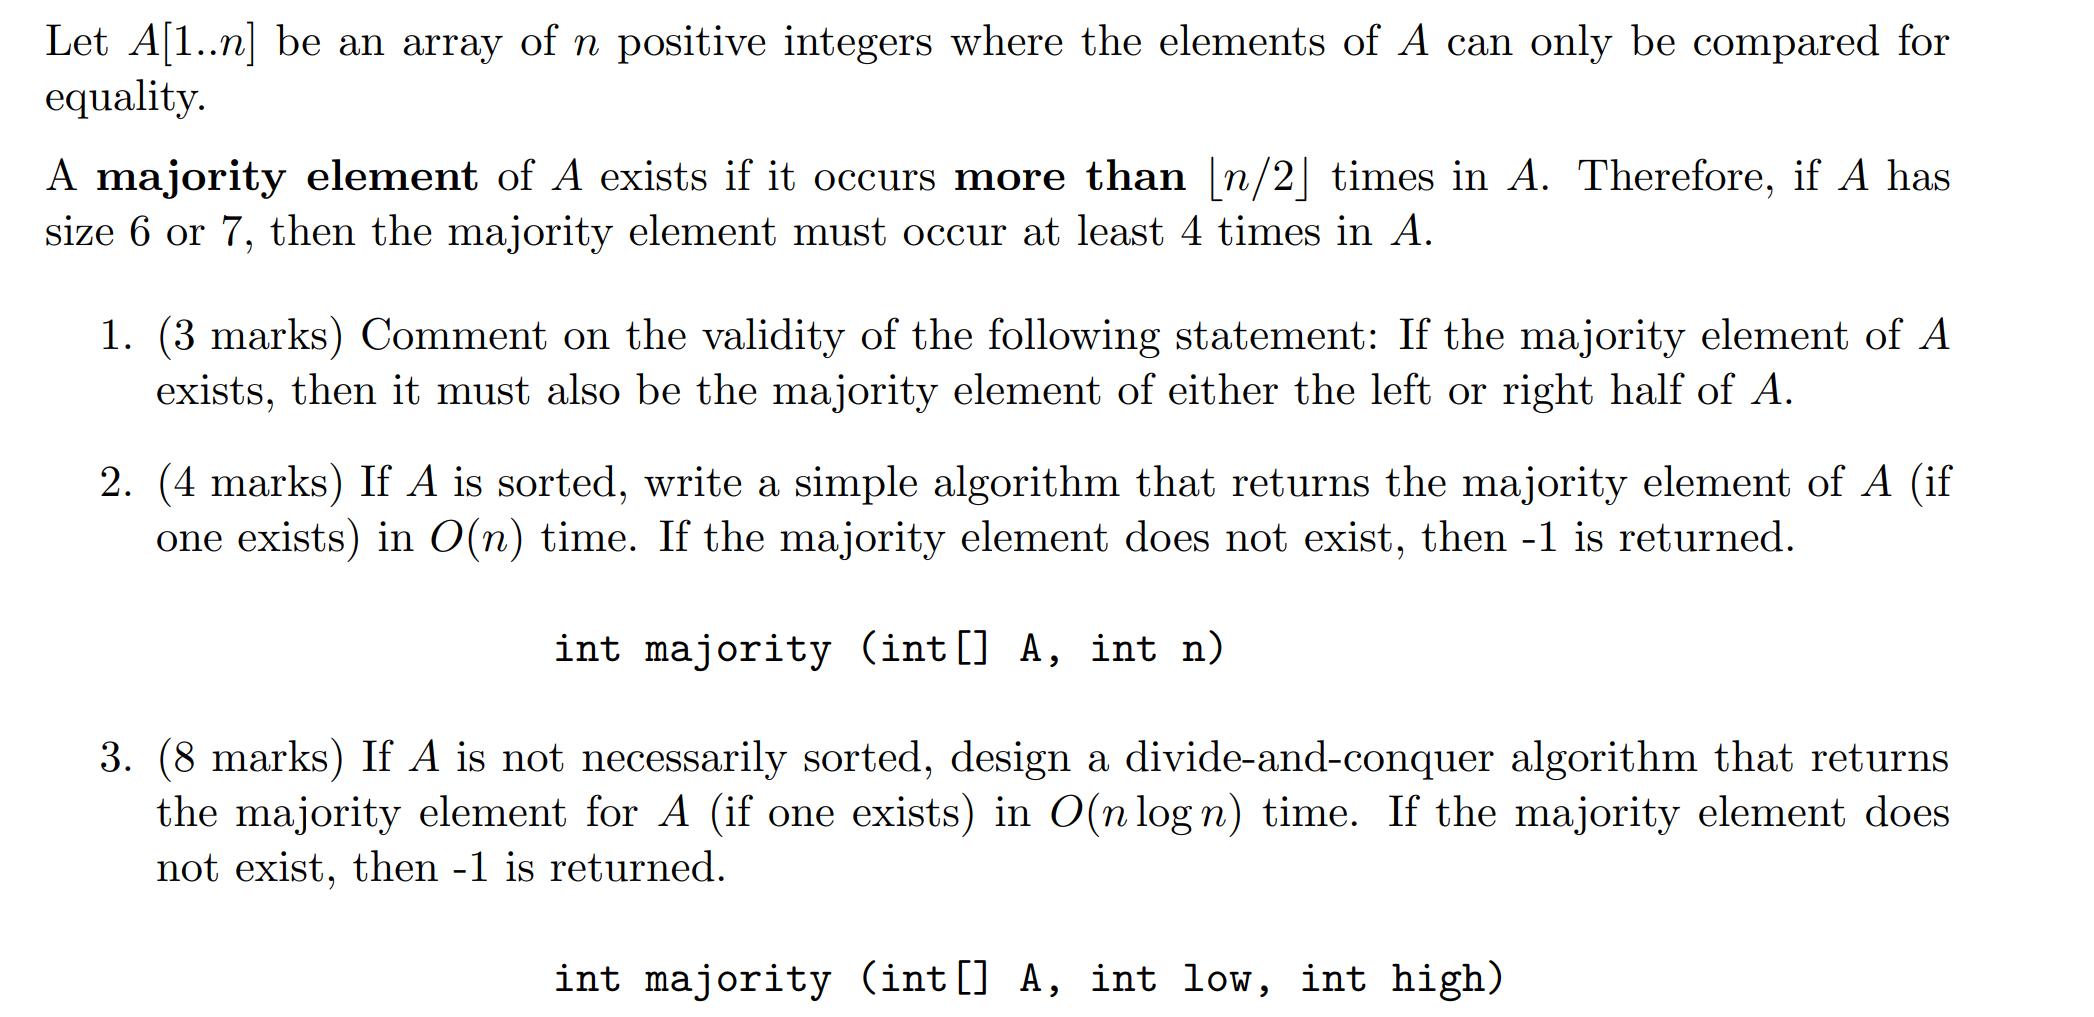 Let A[1..n] be an array of n positive integers where the elements of A can only be compared for equality. A